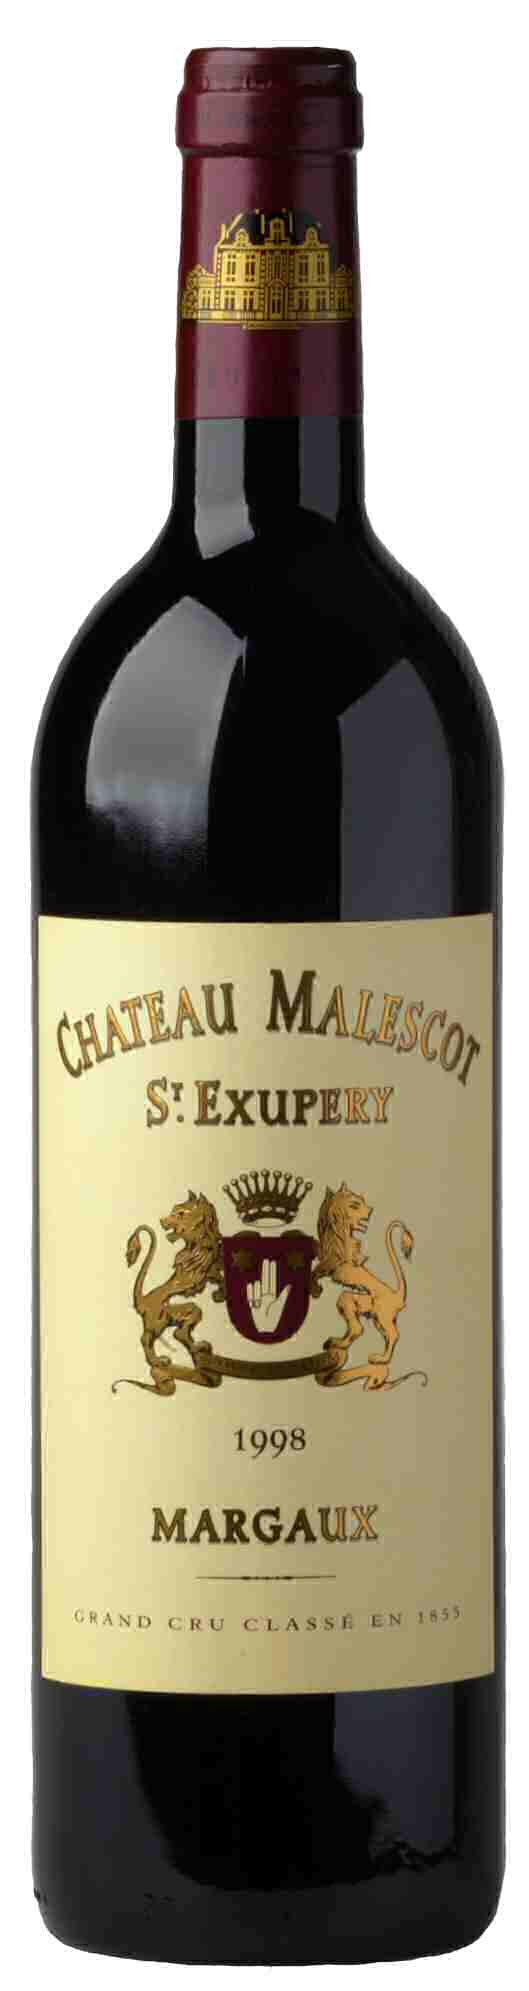 Chateau Malescot St Exupery, Margaux, 2005